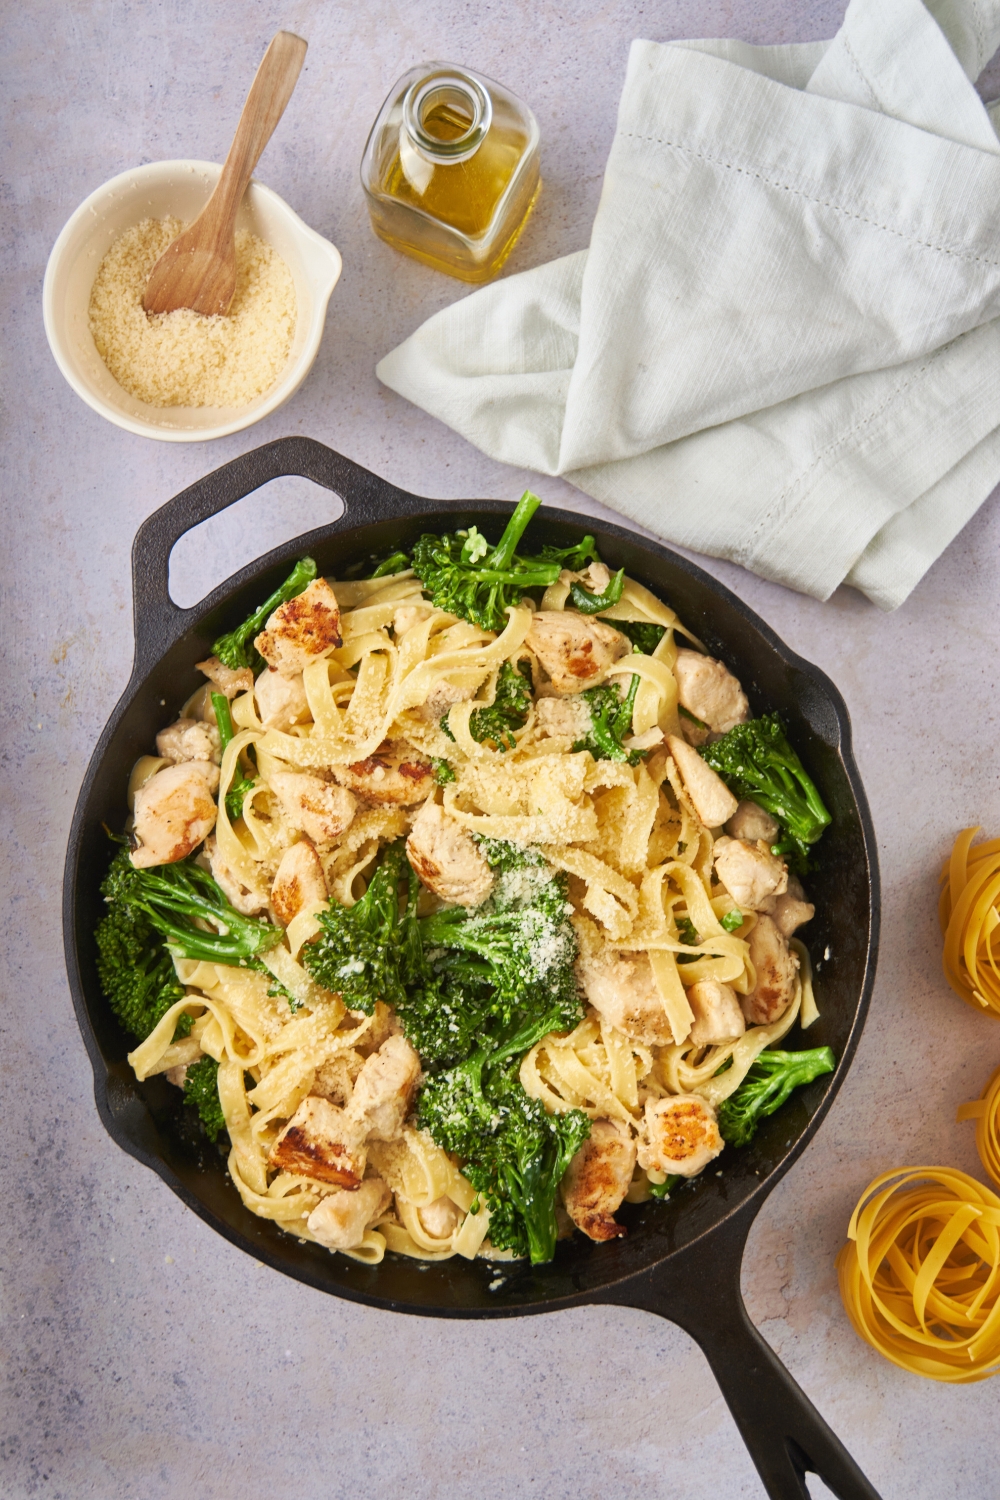 Chicken, broccoli, and fettuccine mixed with alfredo sauce in a skillet.